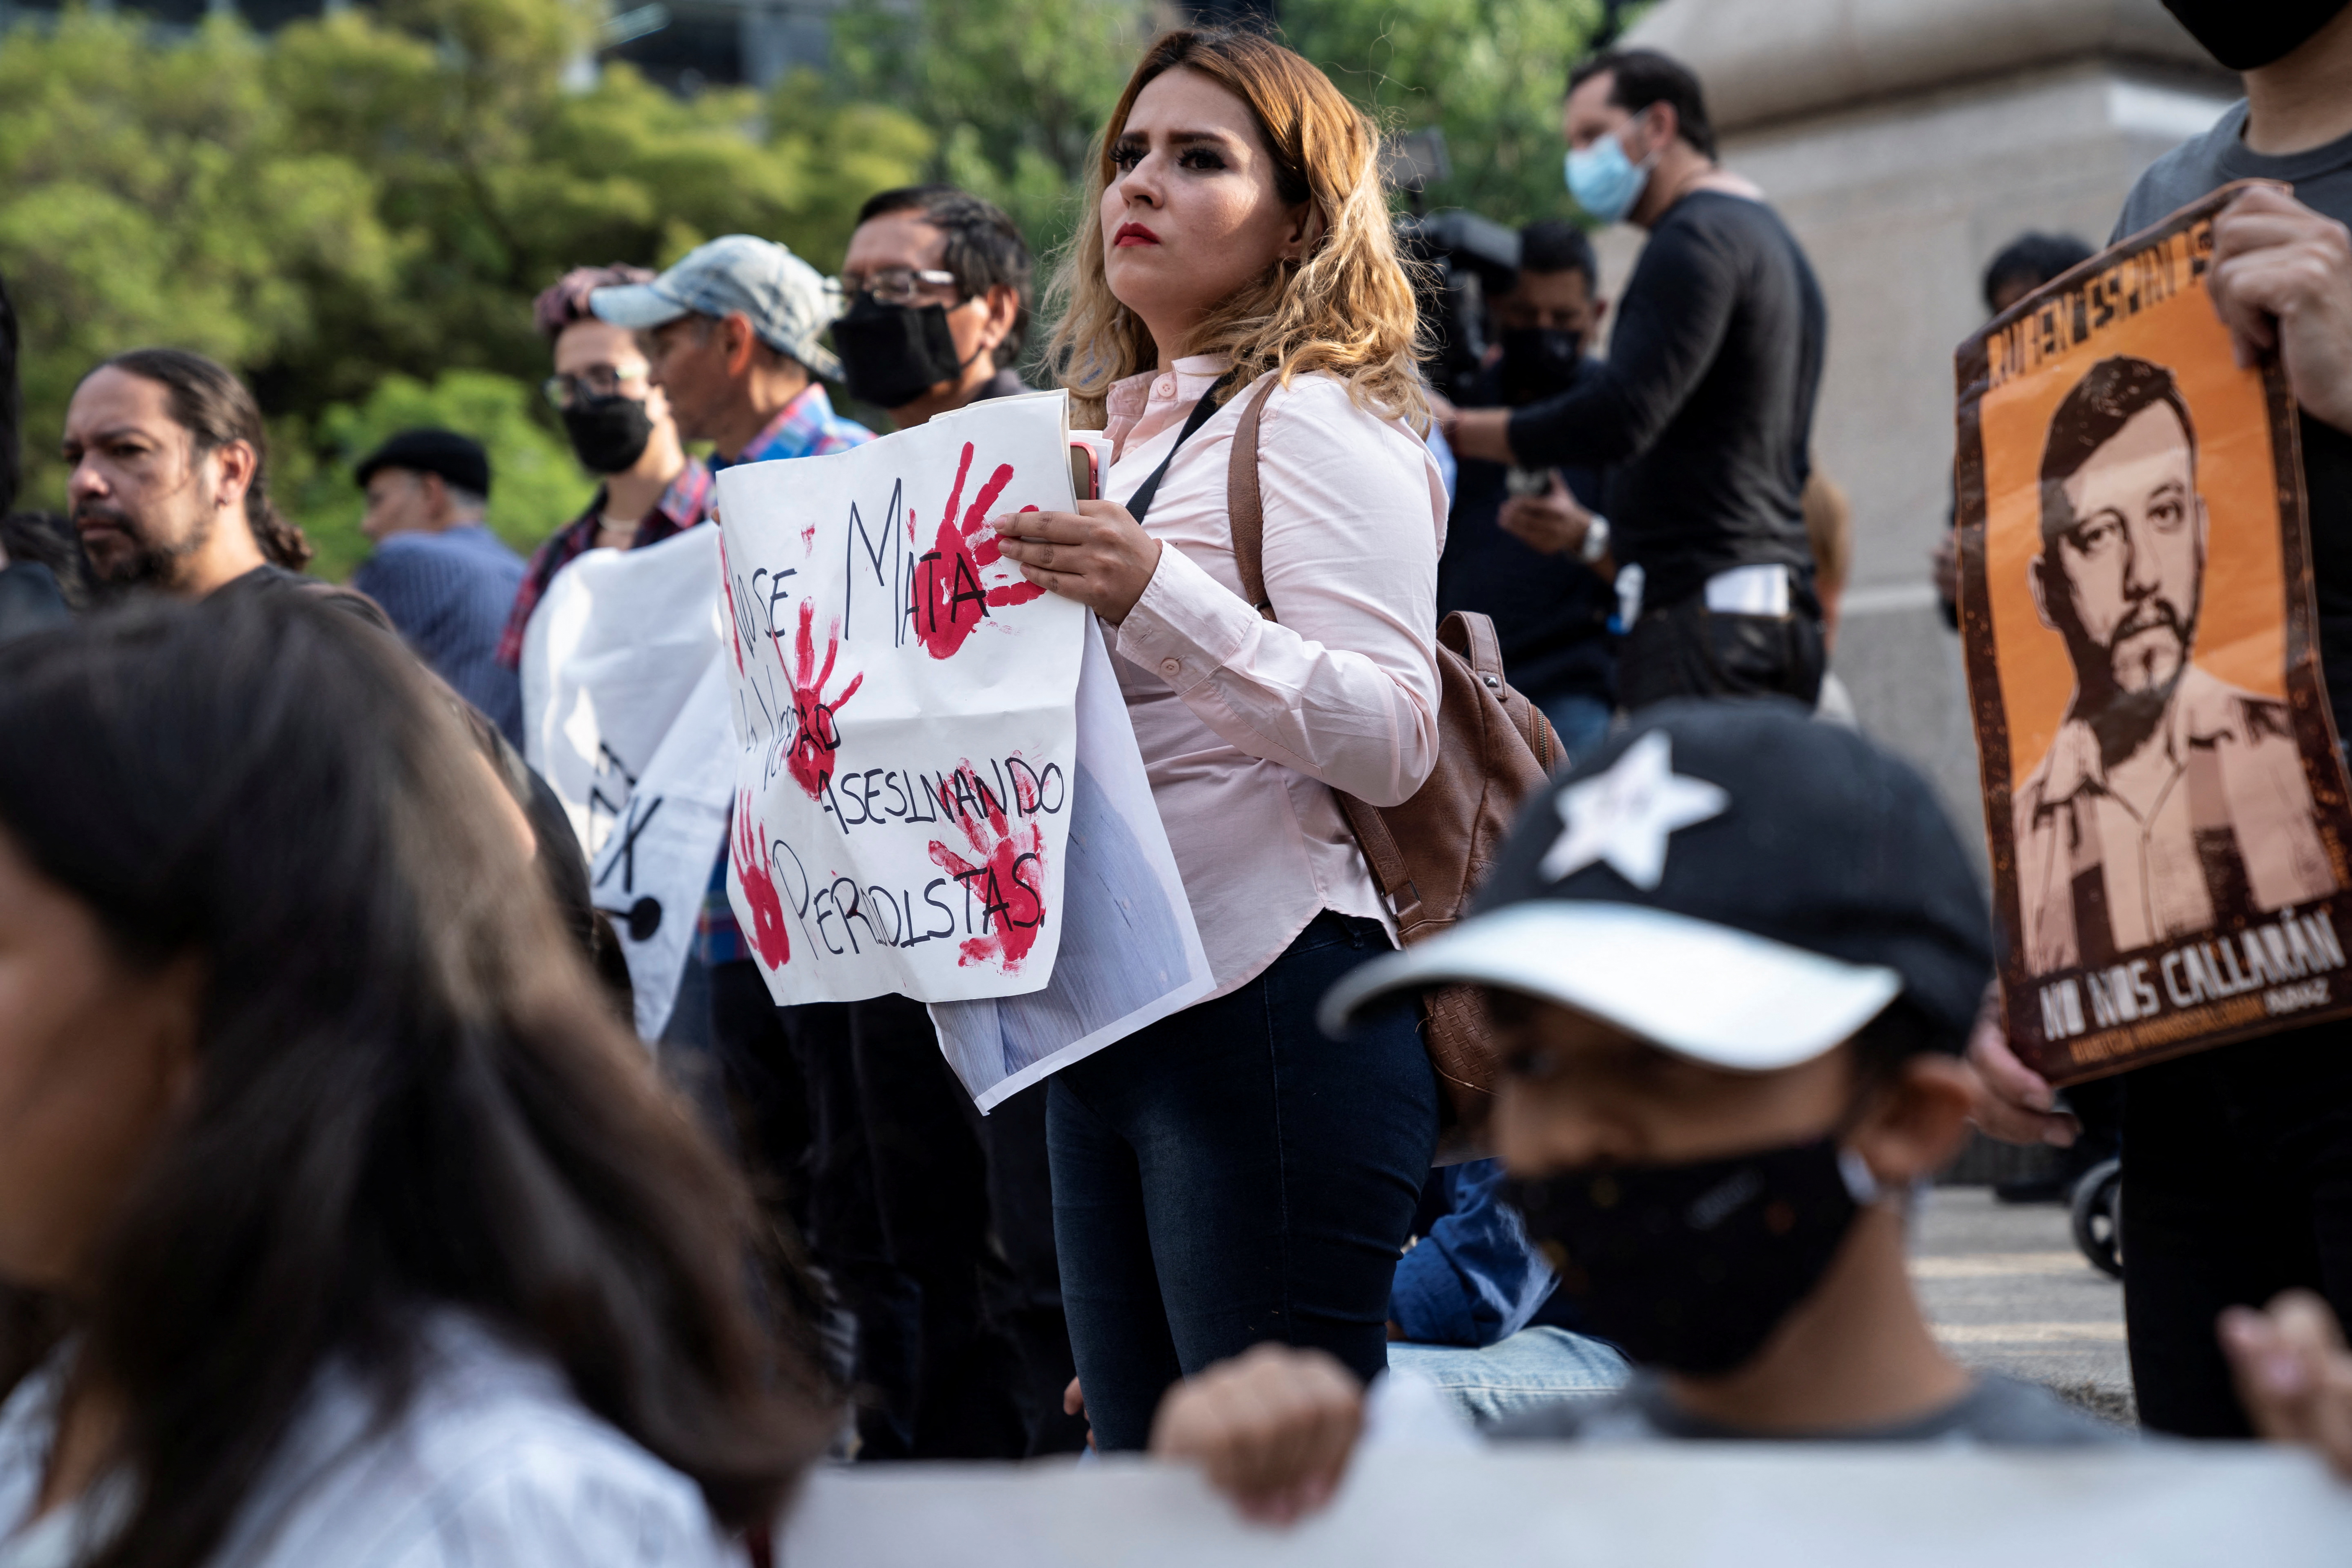 People take part in a protest after a Mexican journalist was found dead in Sinaloa, in Mexico City